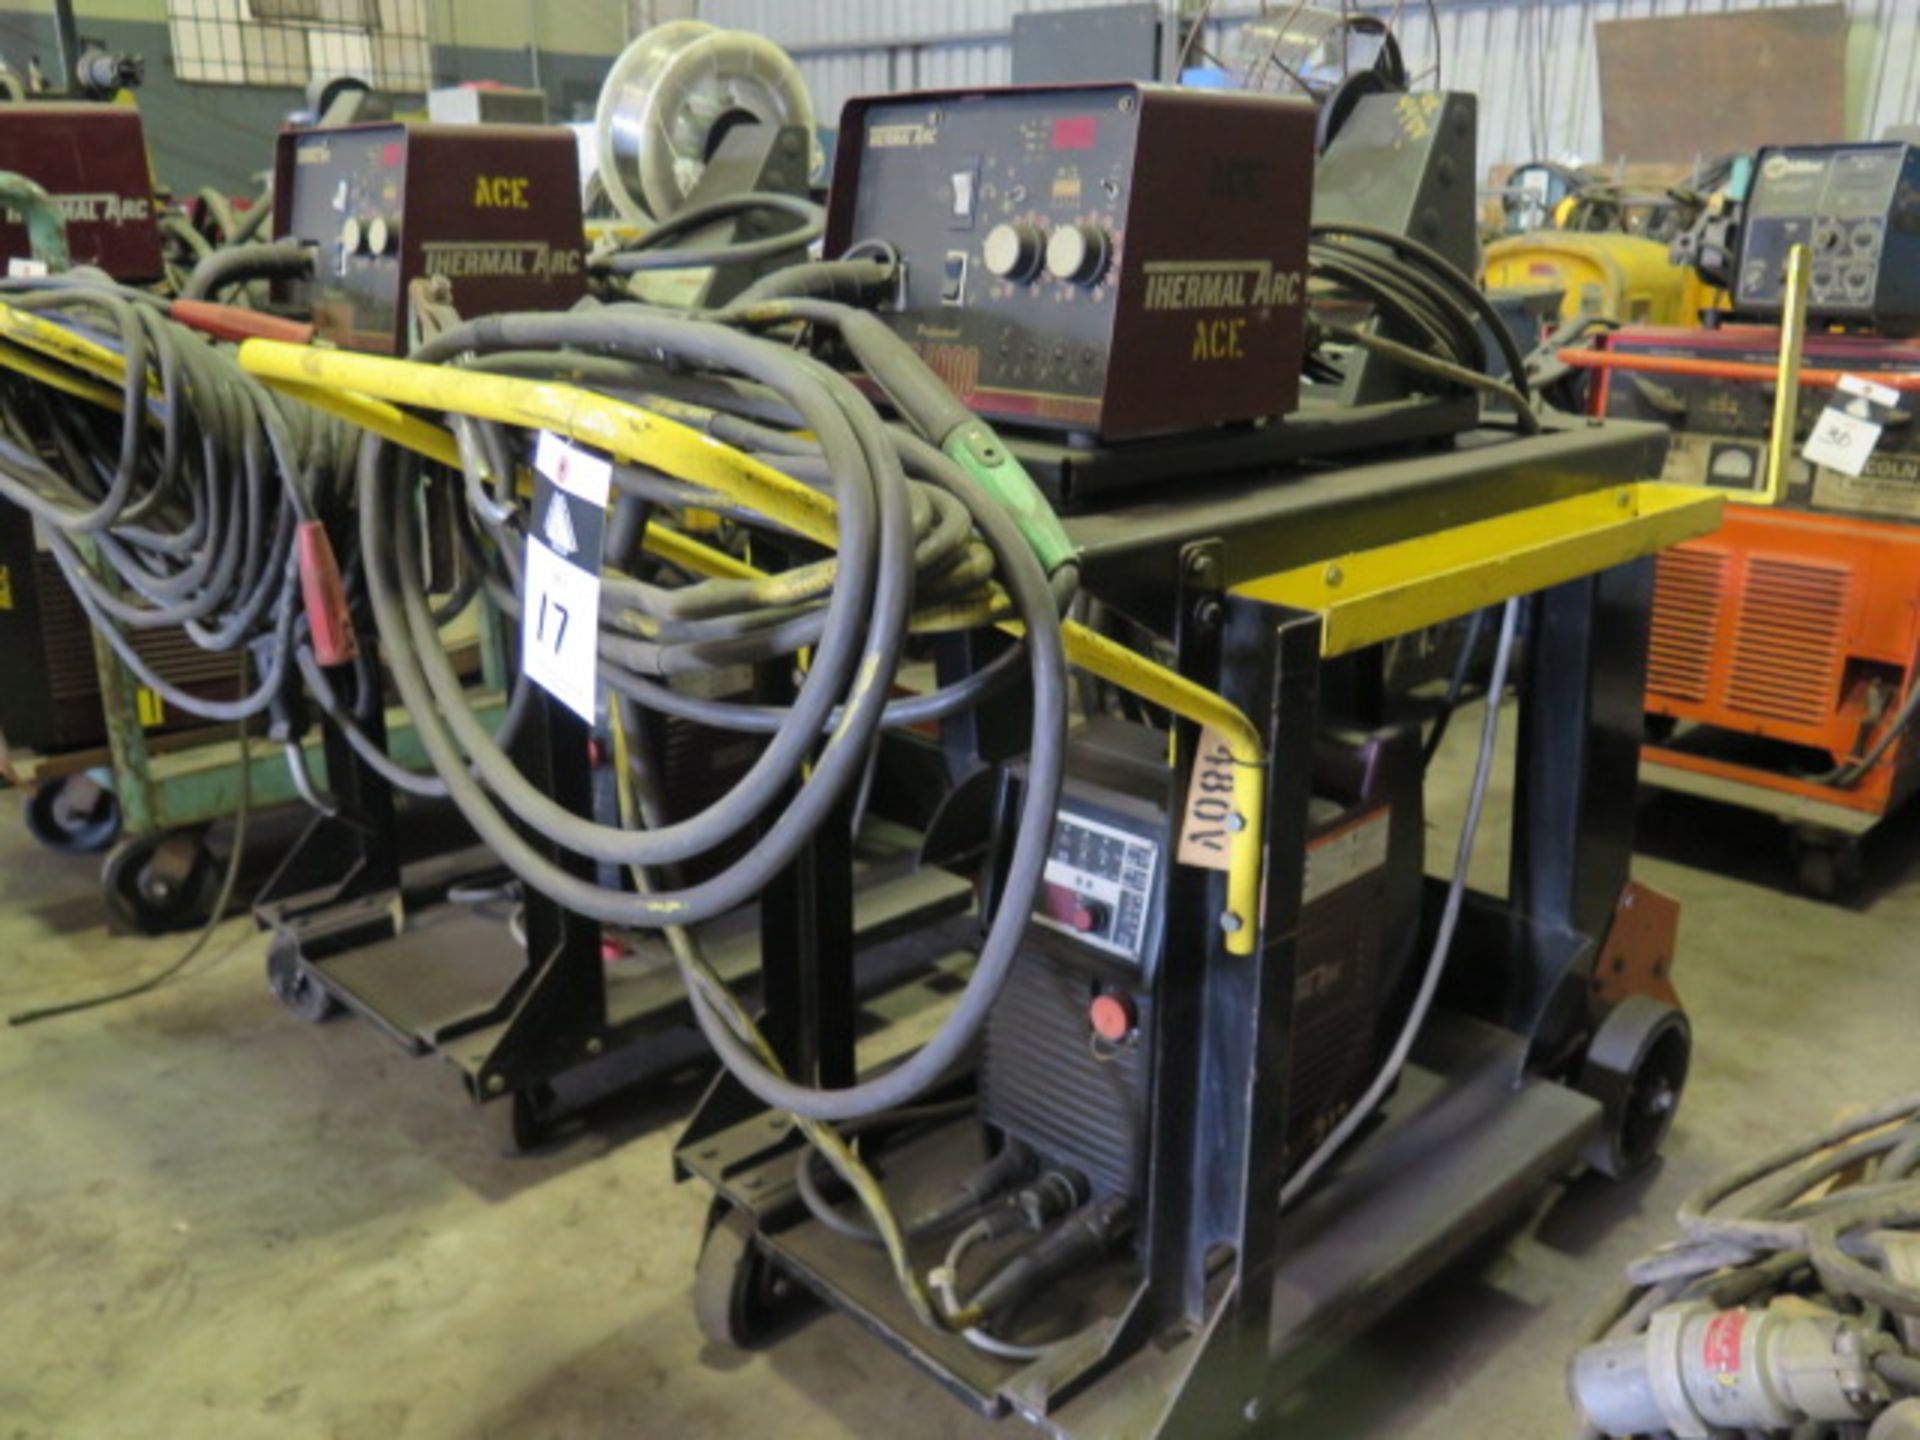 Thermal Arc 400MST Arc Welding Power Source w/ VA2000 Wire Feed (SOLD AS-IS - NO WARRANTY) - Image 2 of 10